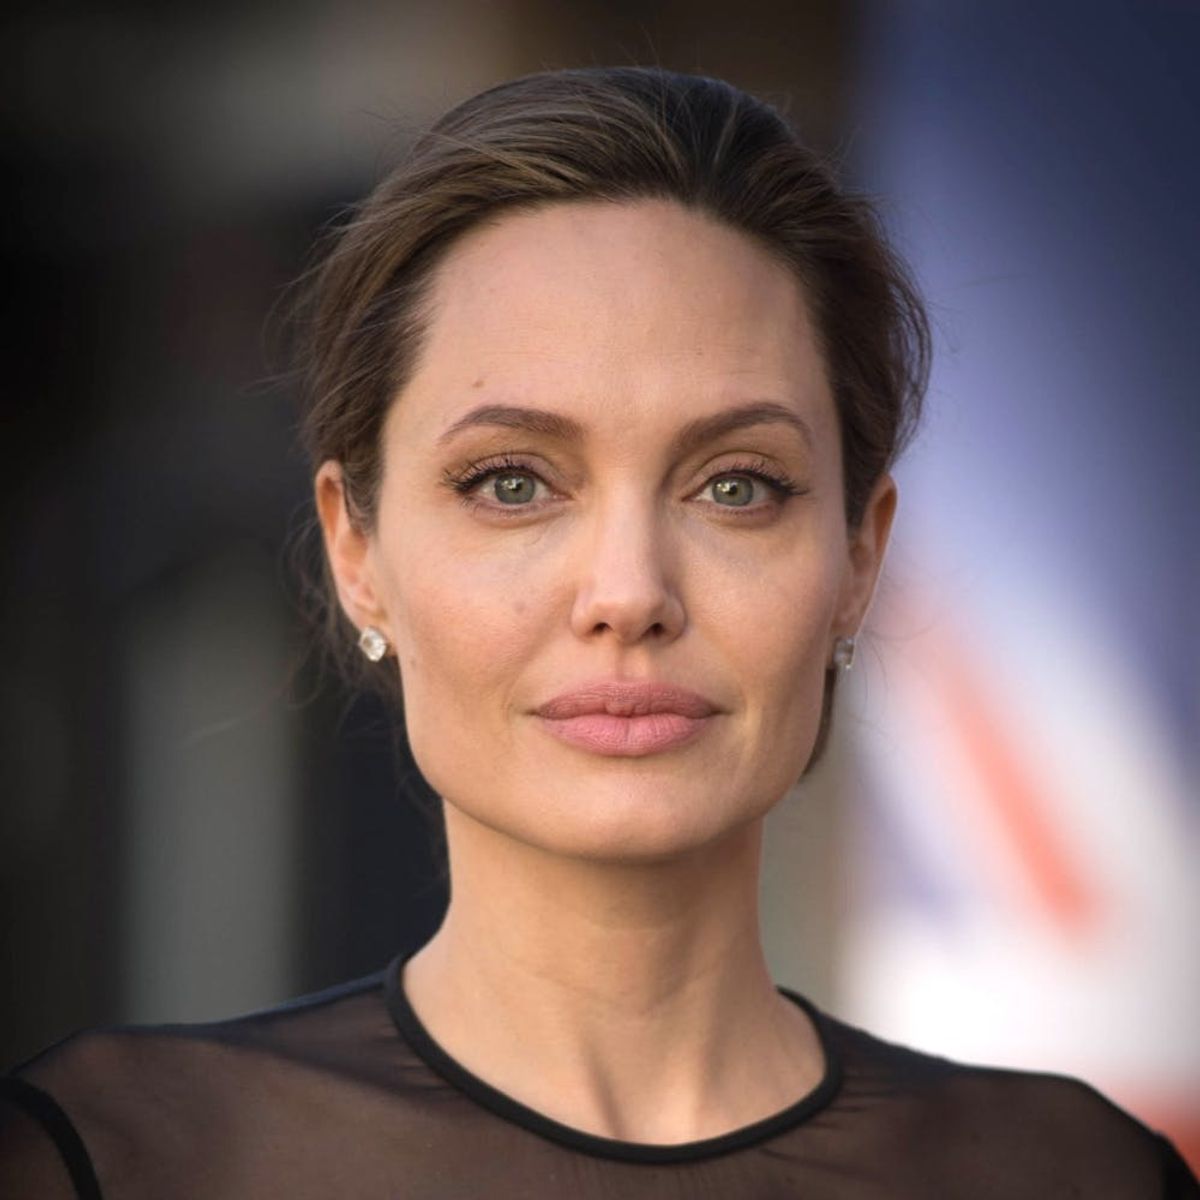 Angelina Jolie Just Released a Second Statement About the Divorce